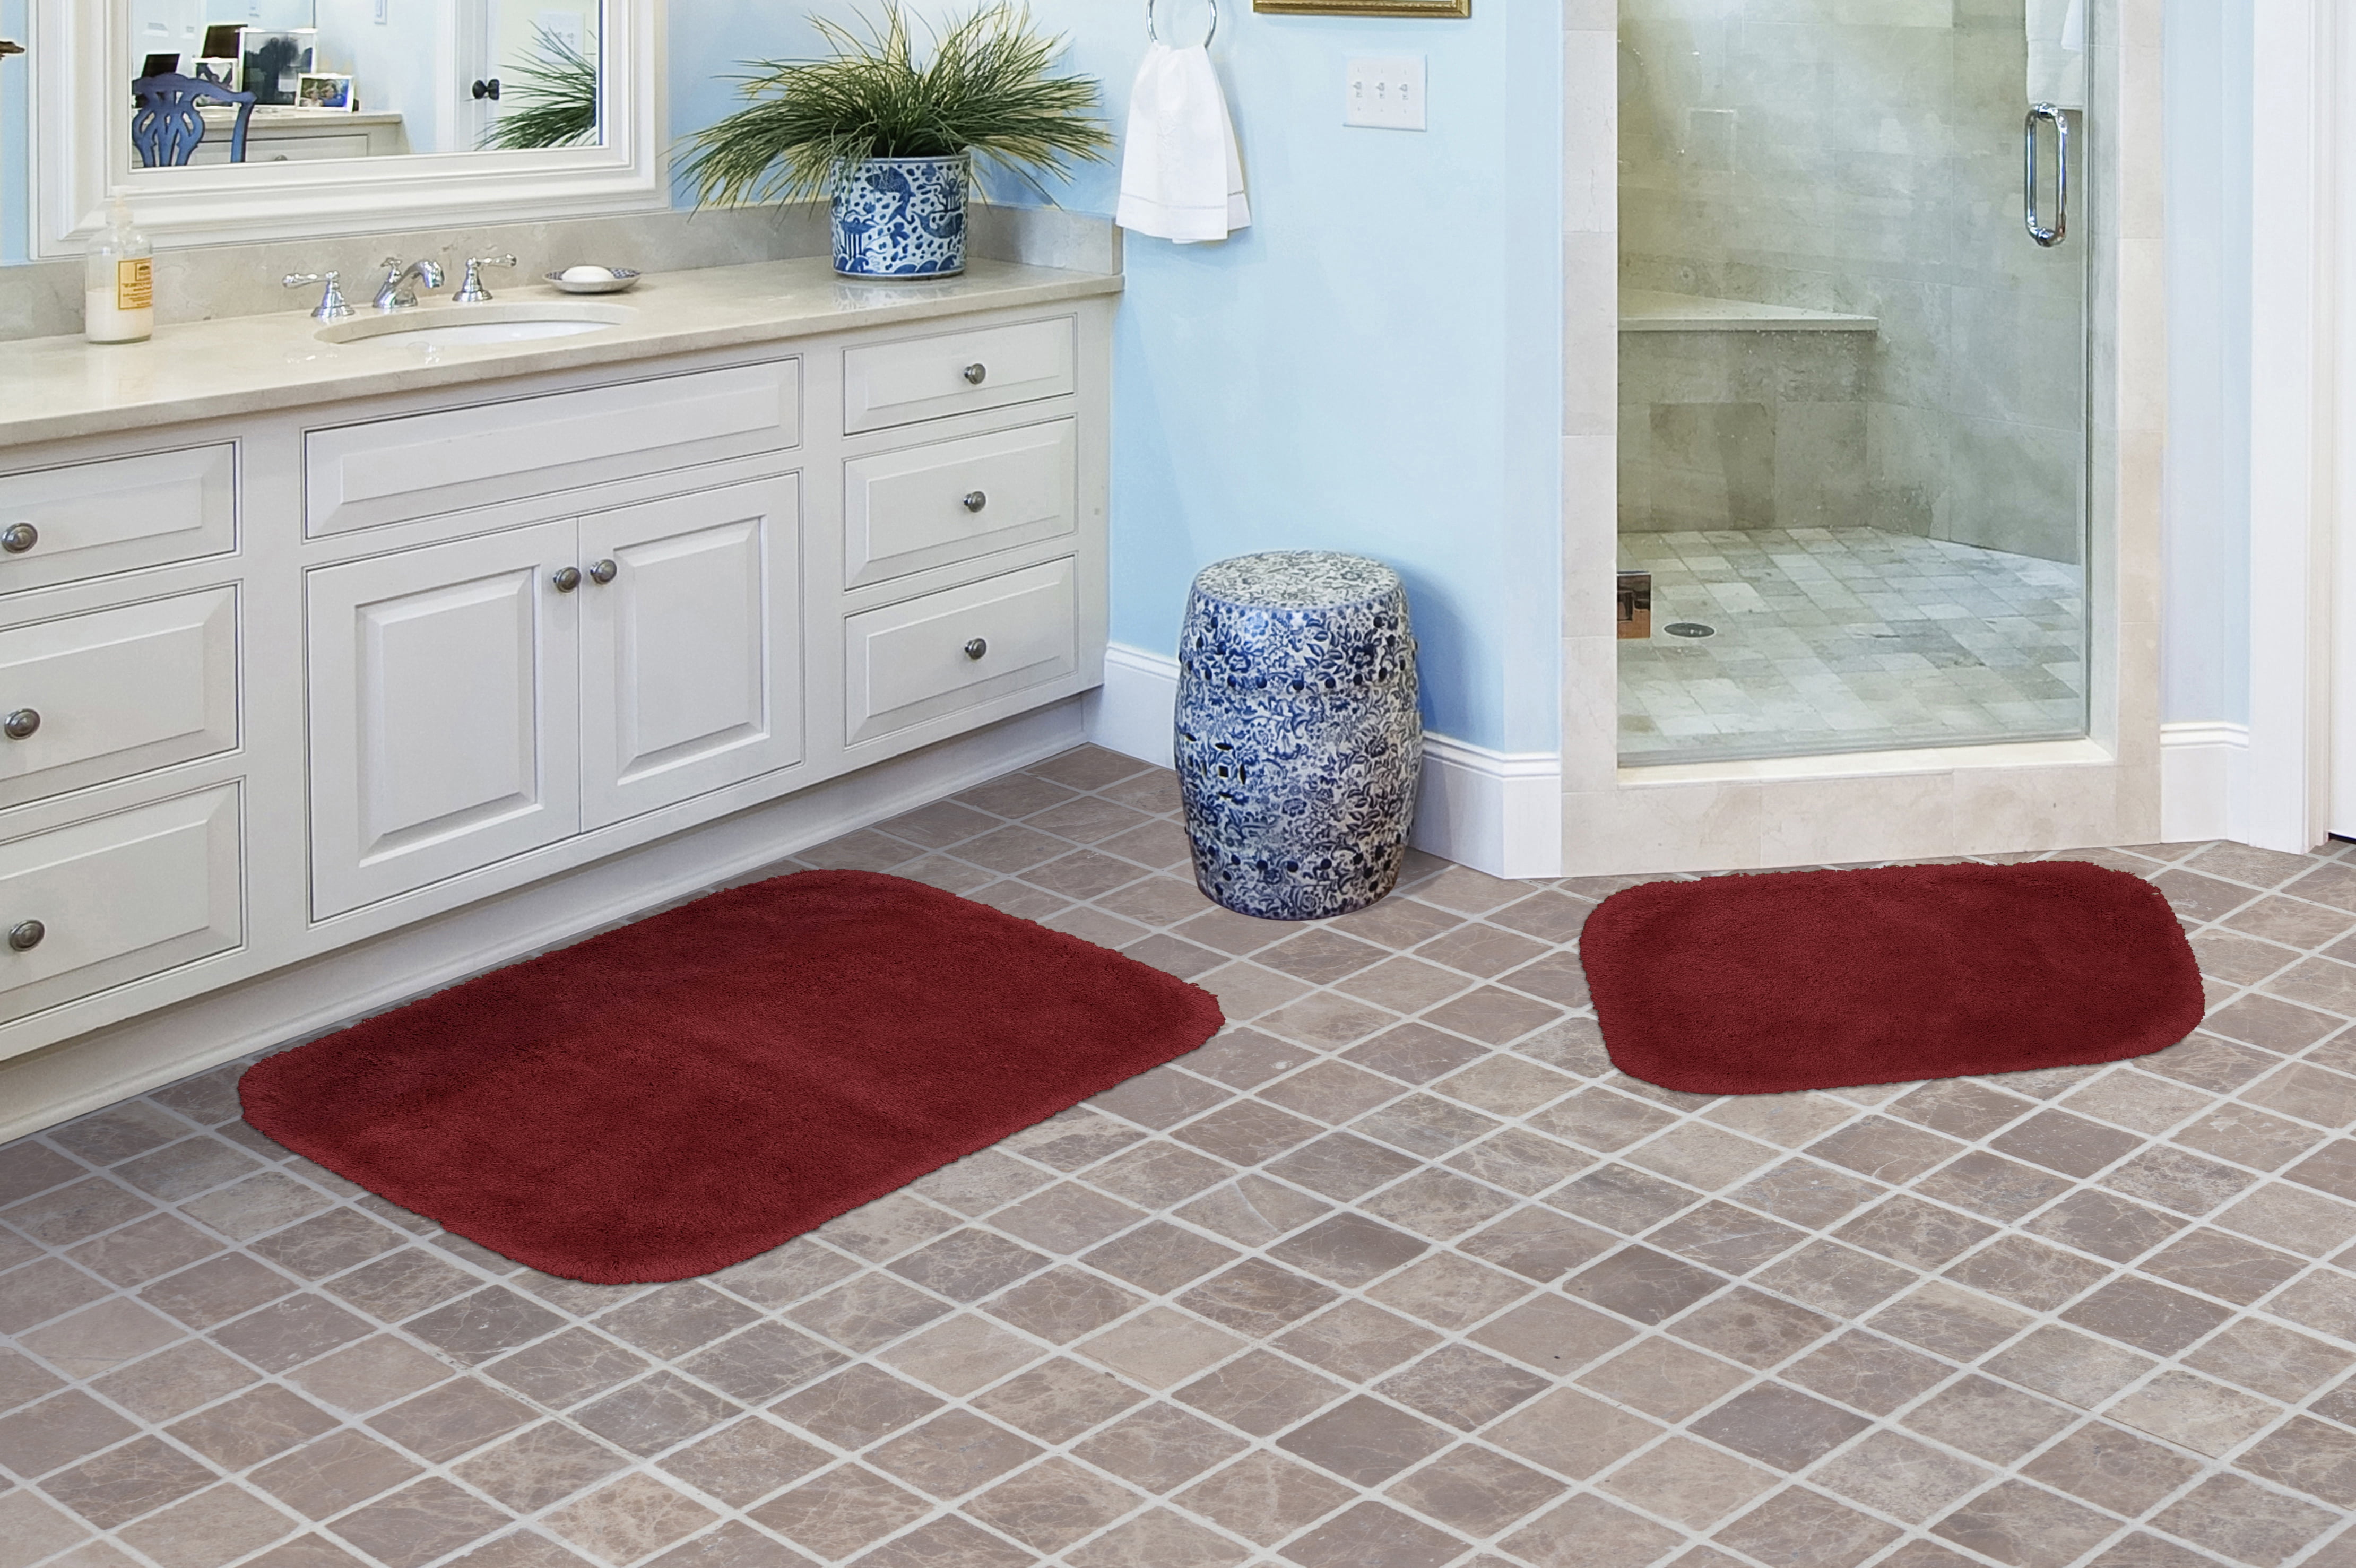 Marvelous Bathroom Rug Sets 50 For Small Home Remodel Ideas with Bathroom  Rug Sets